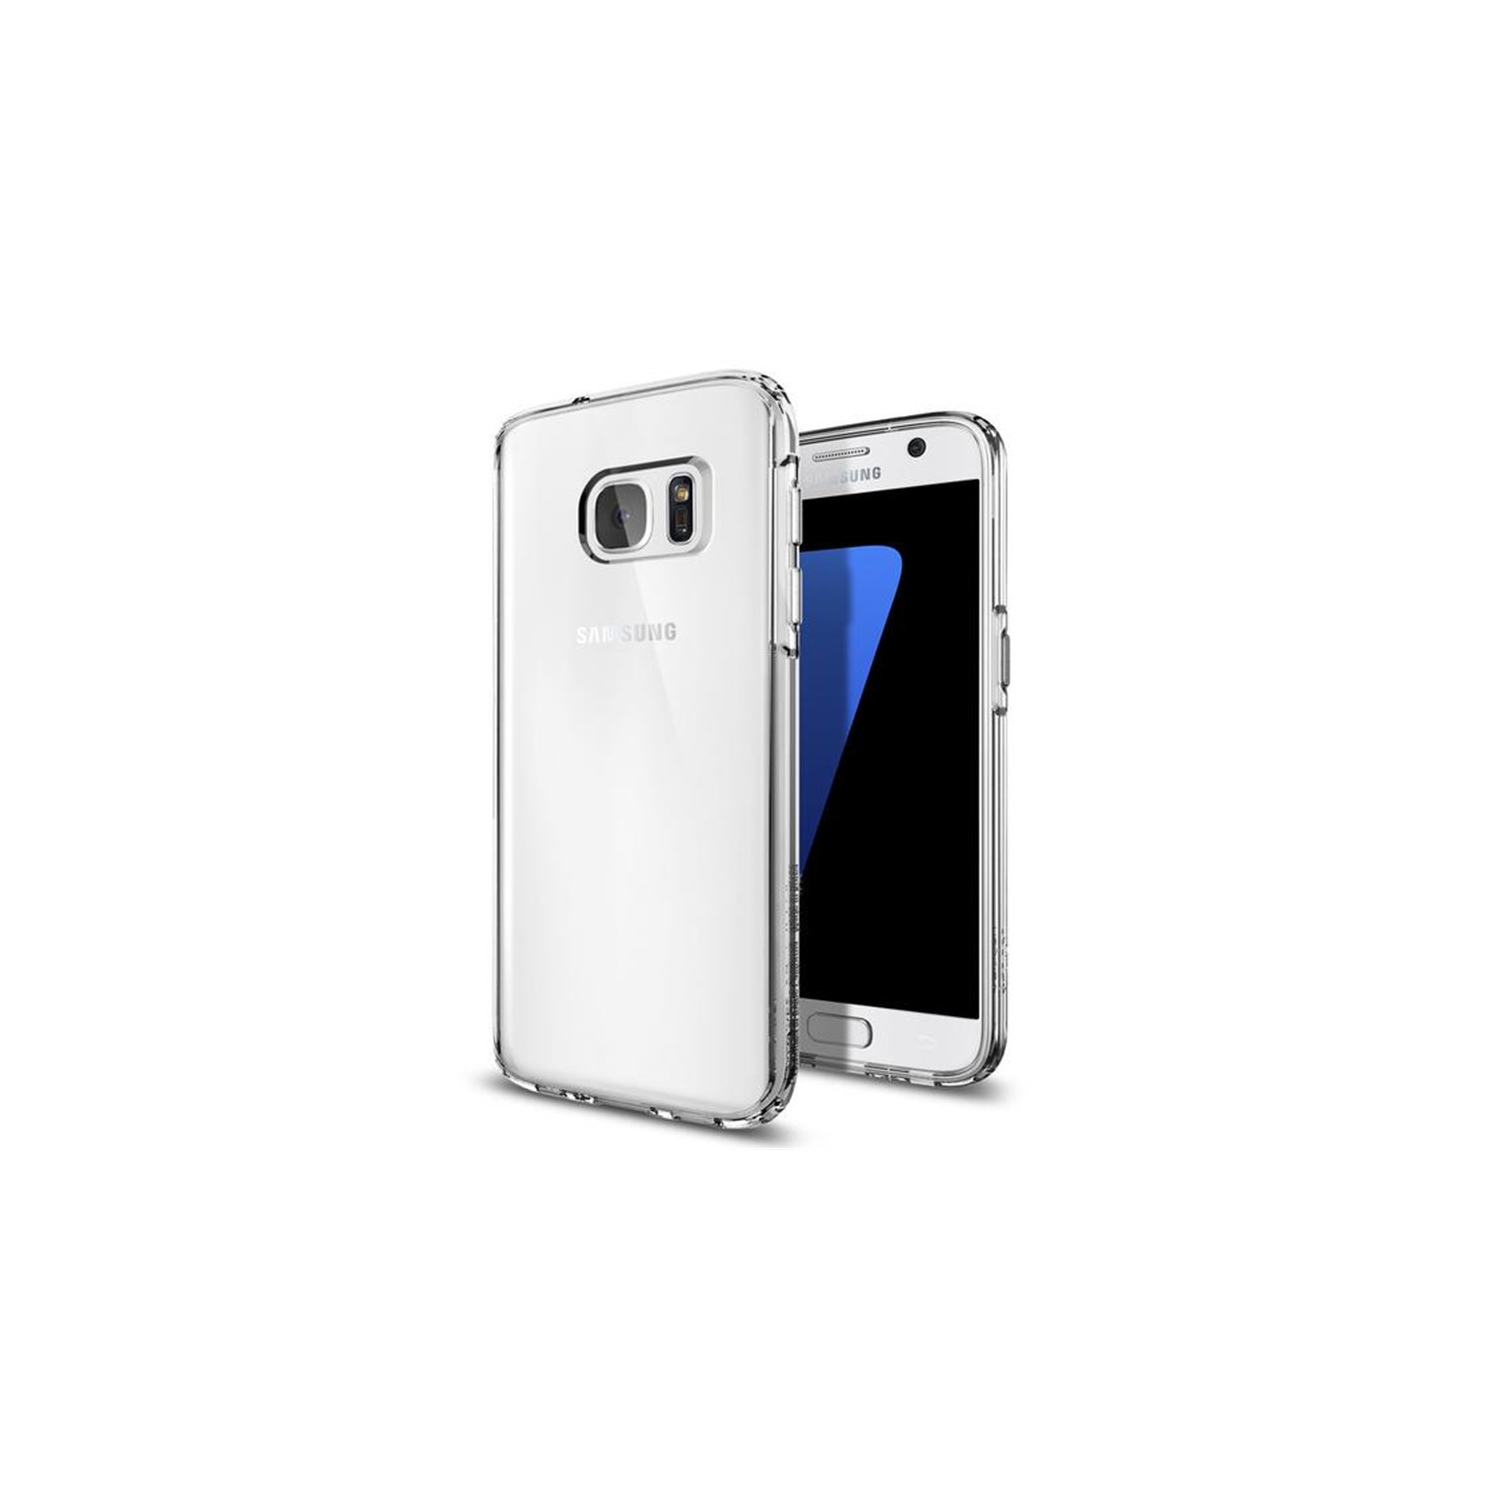 【CSmart】 Ultra Thin Soft TPU Silicone Jelly Bumper Back Cover Case for Samsung Galaxy S7, Transparent Clear